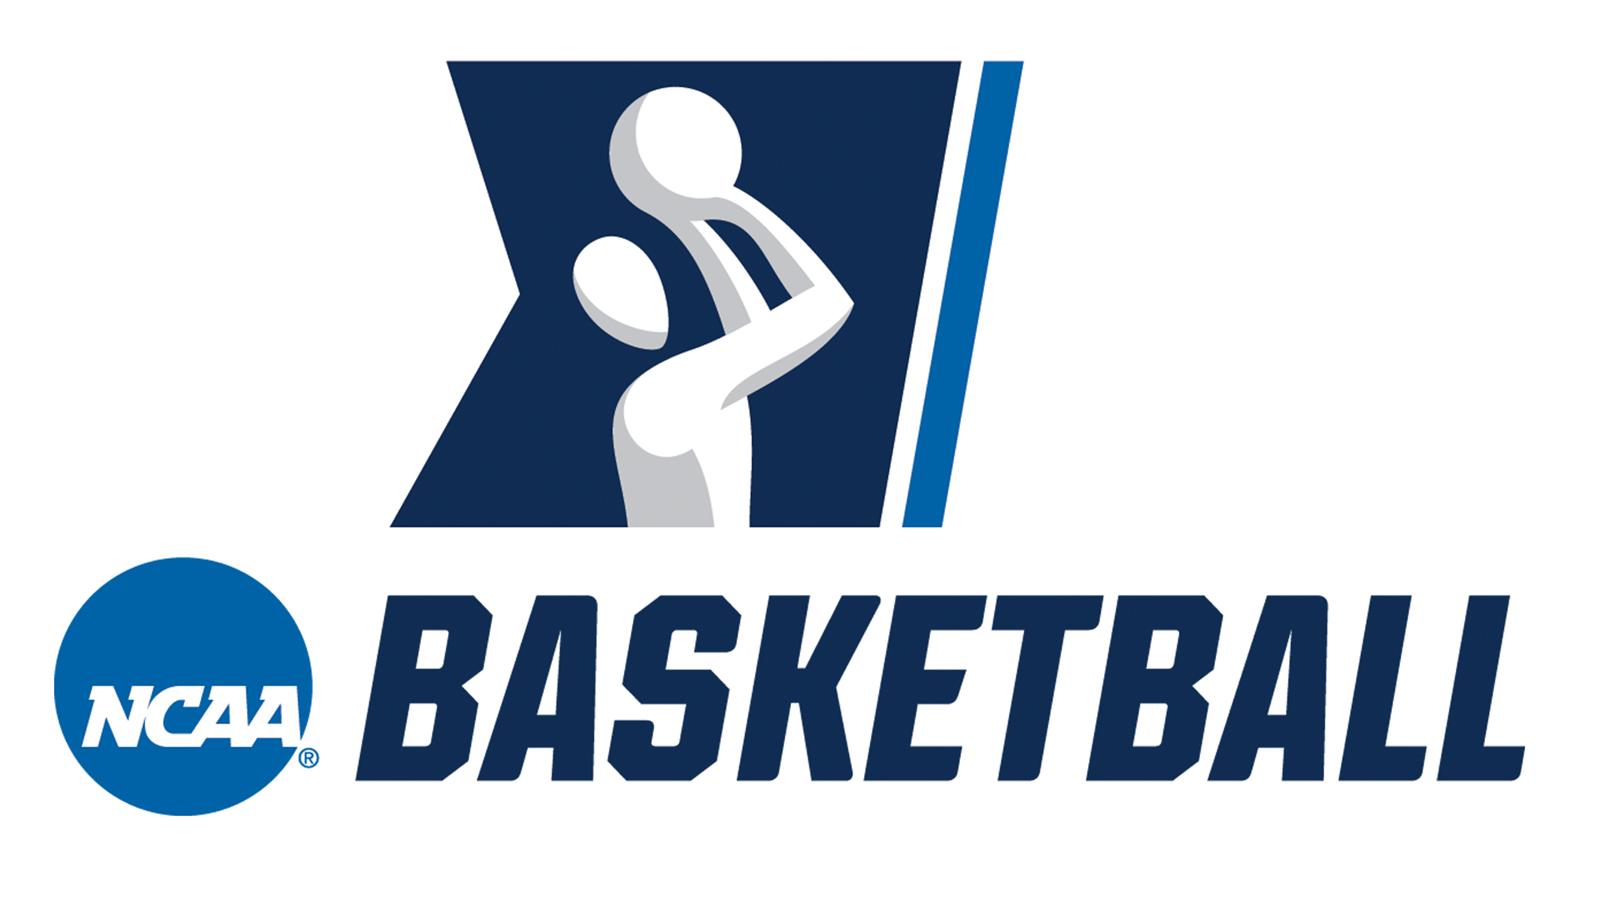 NCAA Men's Basketball Tournament: Rounds 1 & 2 - Session 3 at Amway Center